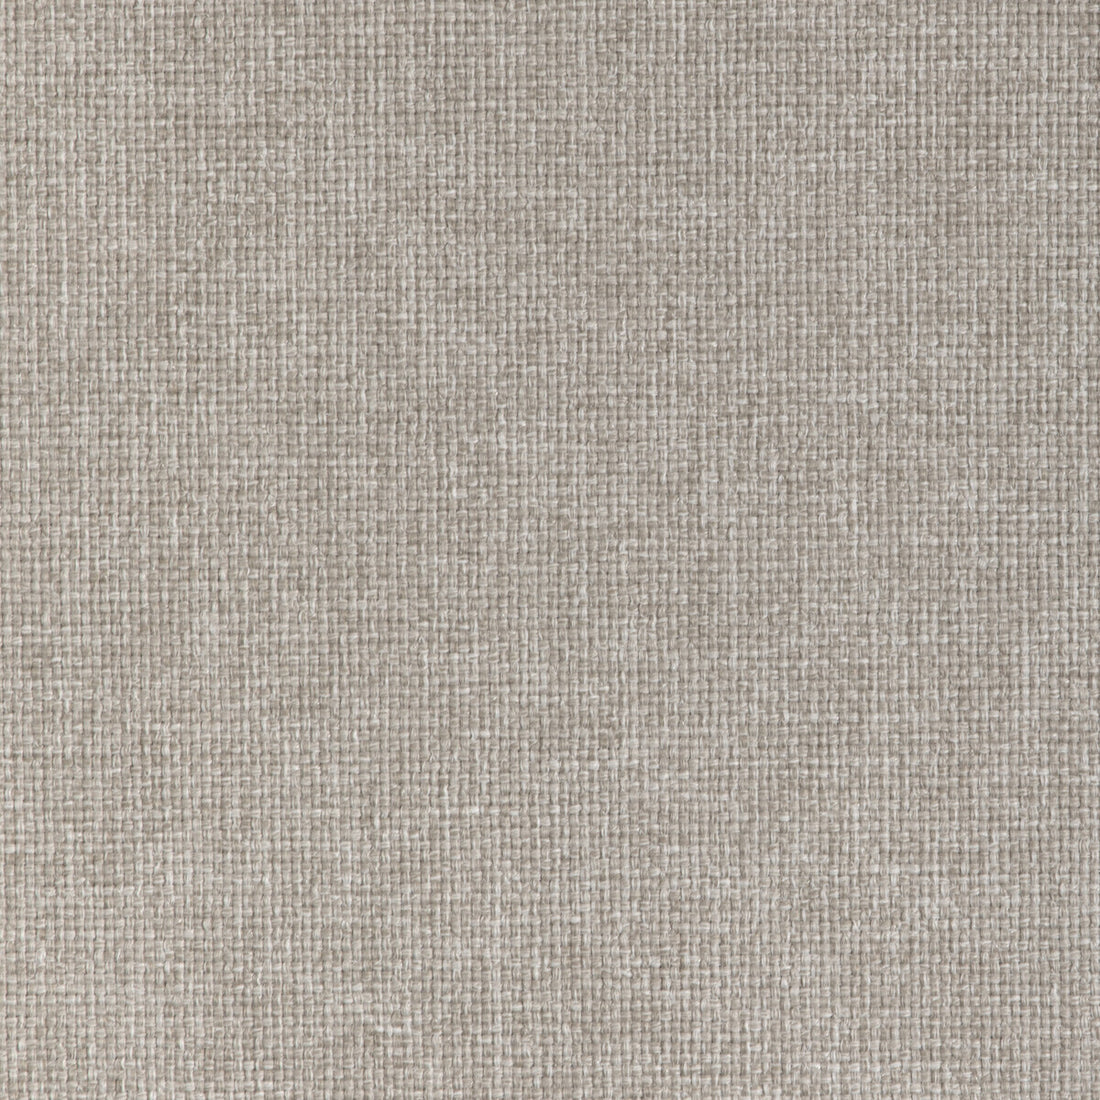 Les Canevas Plain fabric in fog color - pattern 8024114.11.0 - by Brunschwig &amp; Fils in the Les Ensembliers L&